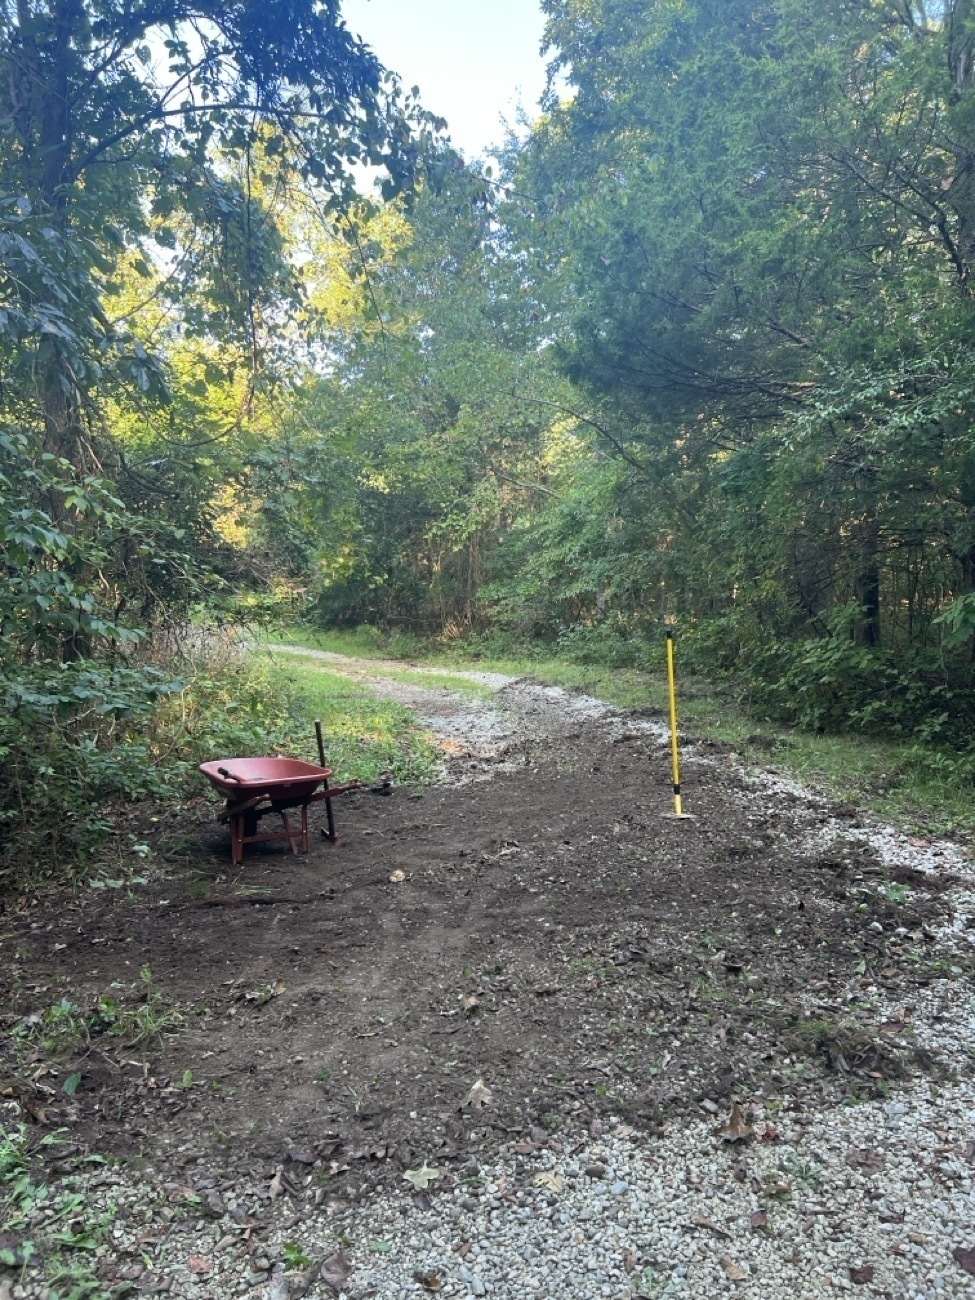 A gray gravel road through the woods. Very dark colored dirt is being raked from the left shoulder onto the gravel. It looks messy.